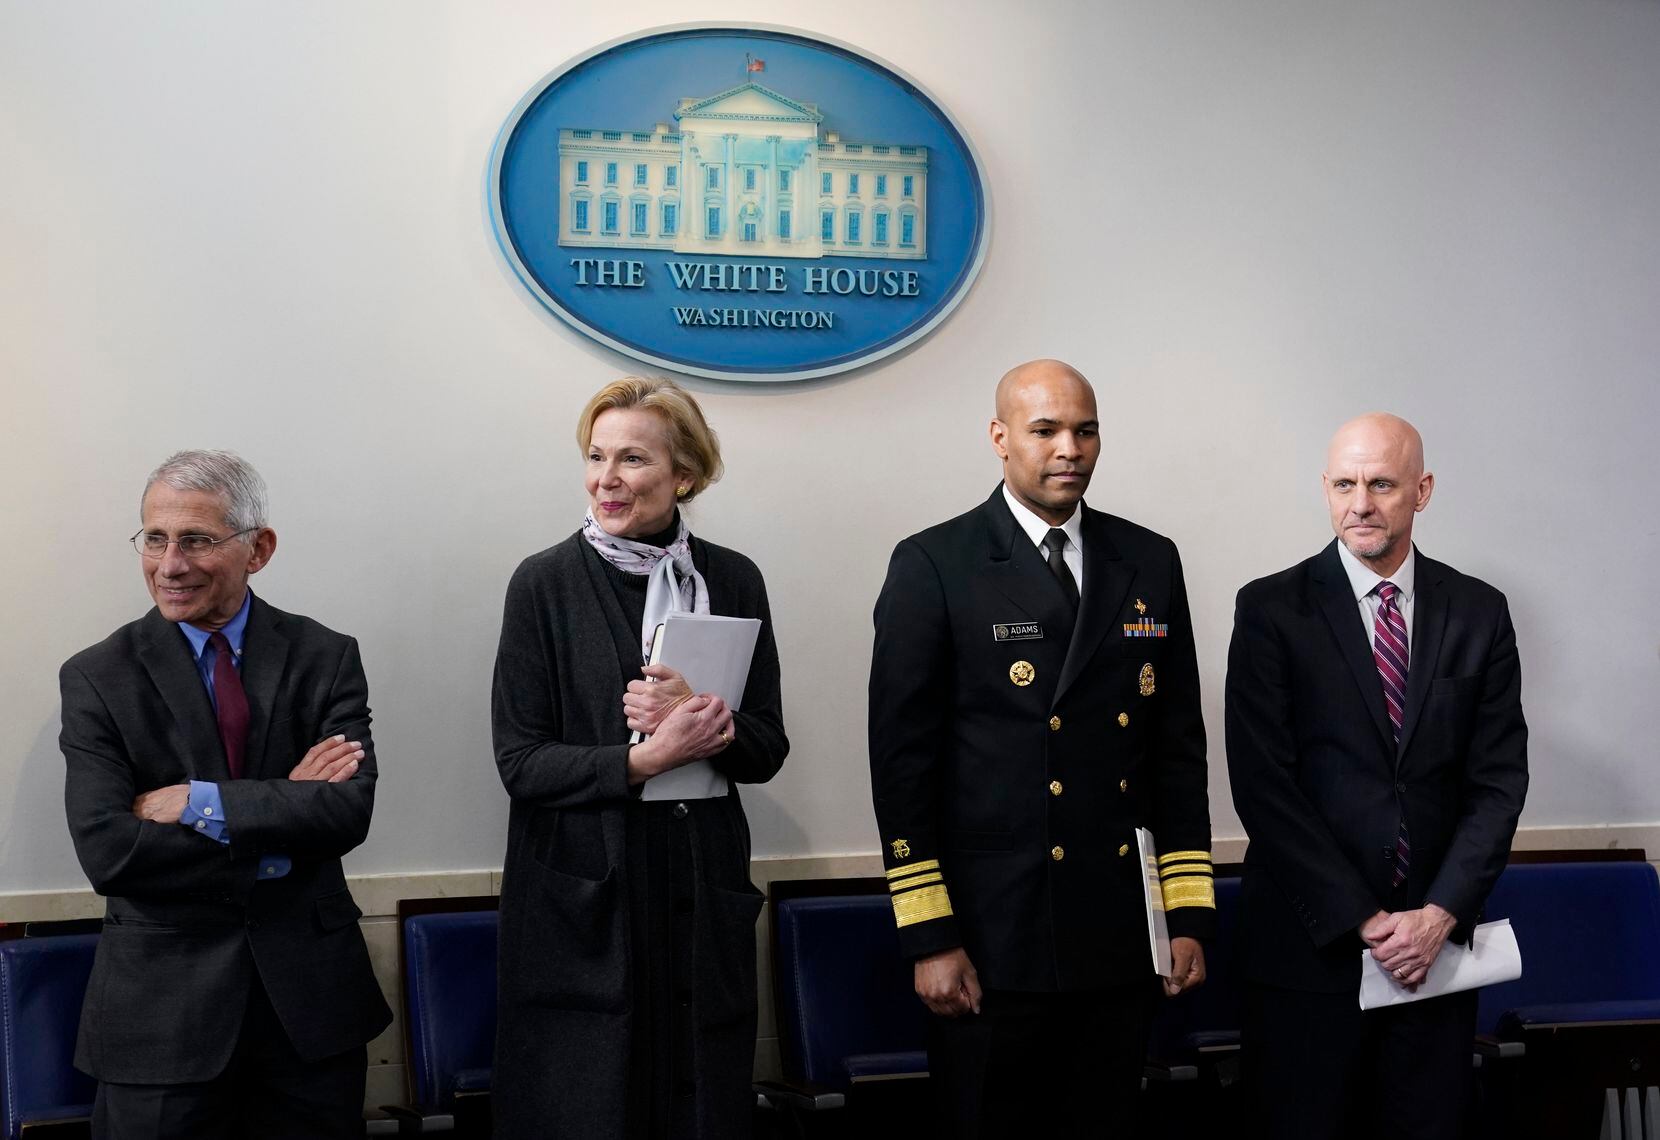 The Trump administration's coronavirus task force included then Surgeon General Jerome Adams (second from right), flanked by Director of the National Institute of Allergy and Infectious Diseases Dr. Anthony Fauci (left), White House coronavirus response coordinator Dr. Deborah Birx and Food and Drug Administration Commissioner Dr. Stephen Hahn (right). They're shown here at a task force briefing at the White House in April 2020.